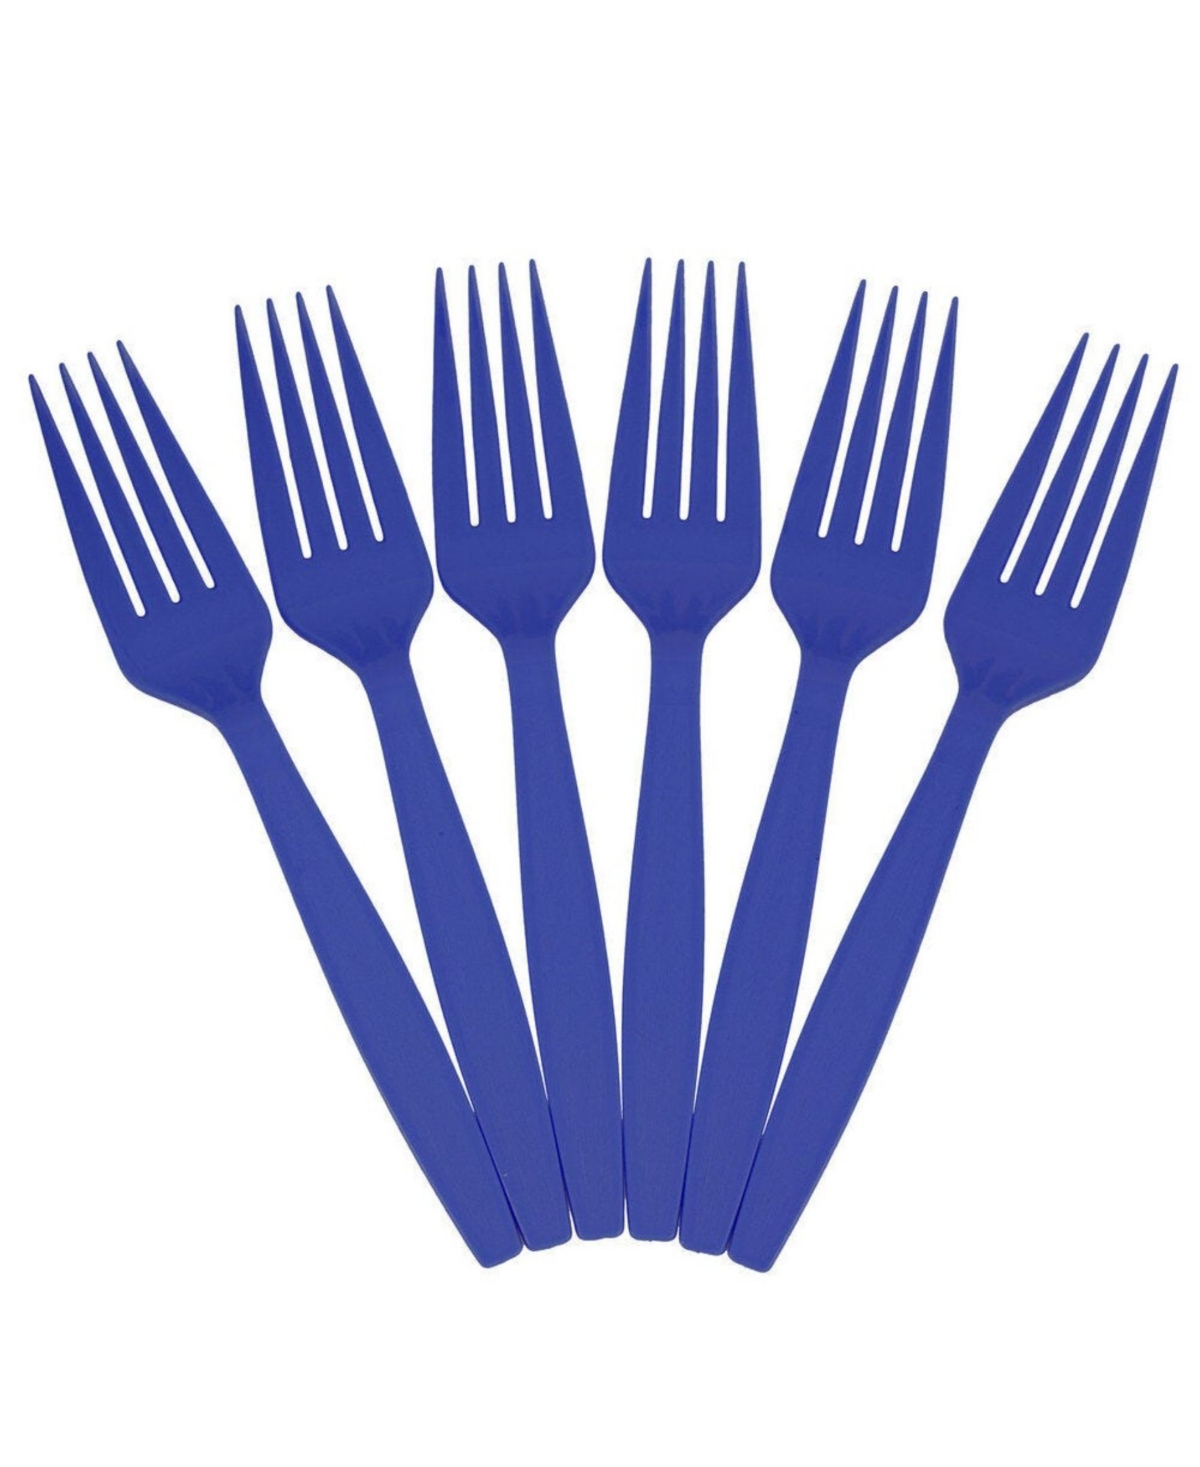 Big Party Pack of Premium Plastic Forks - 100 Disposable Forks Per Box - Blue